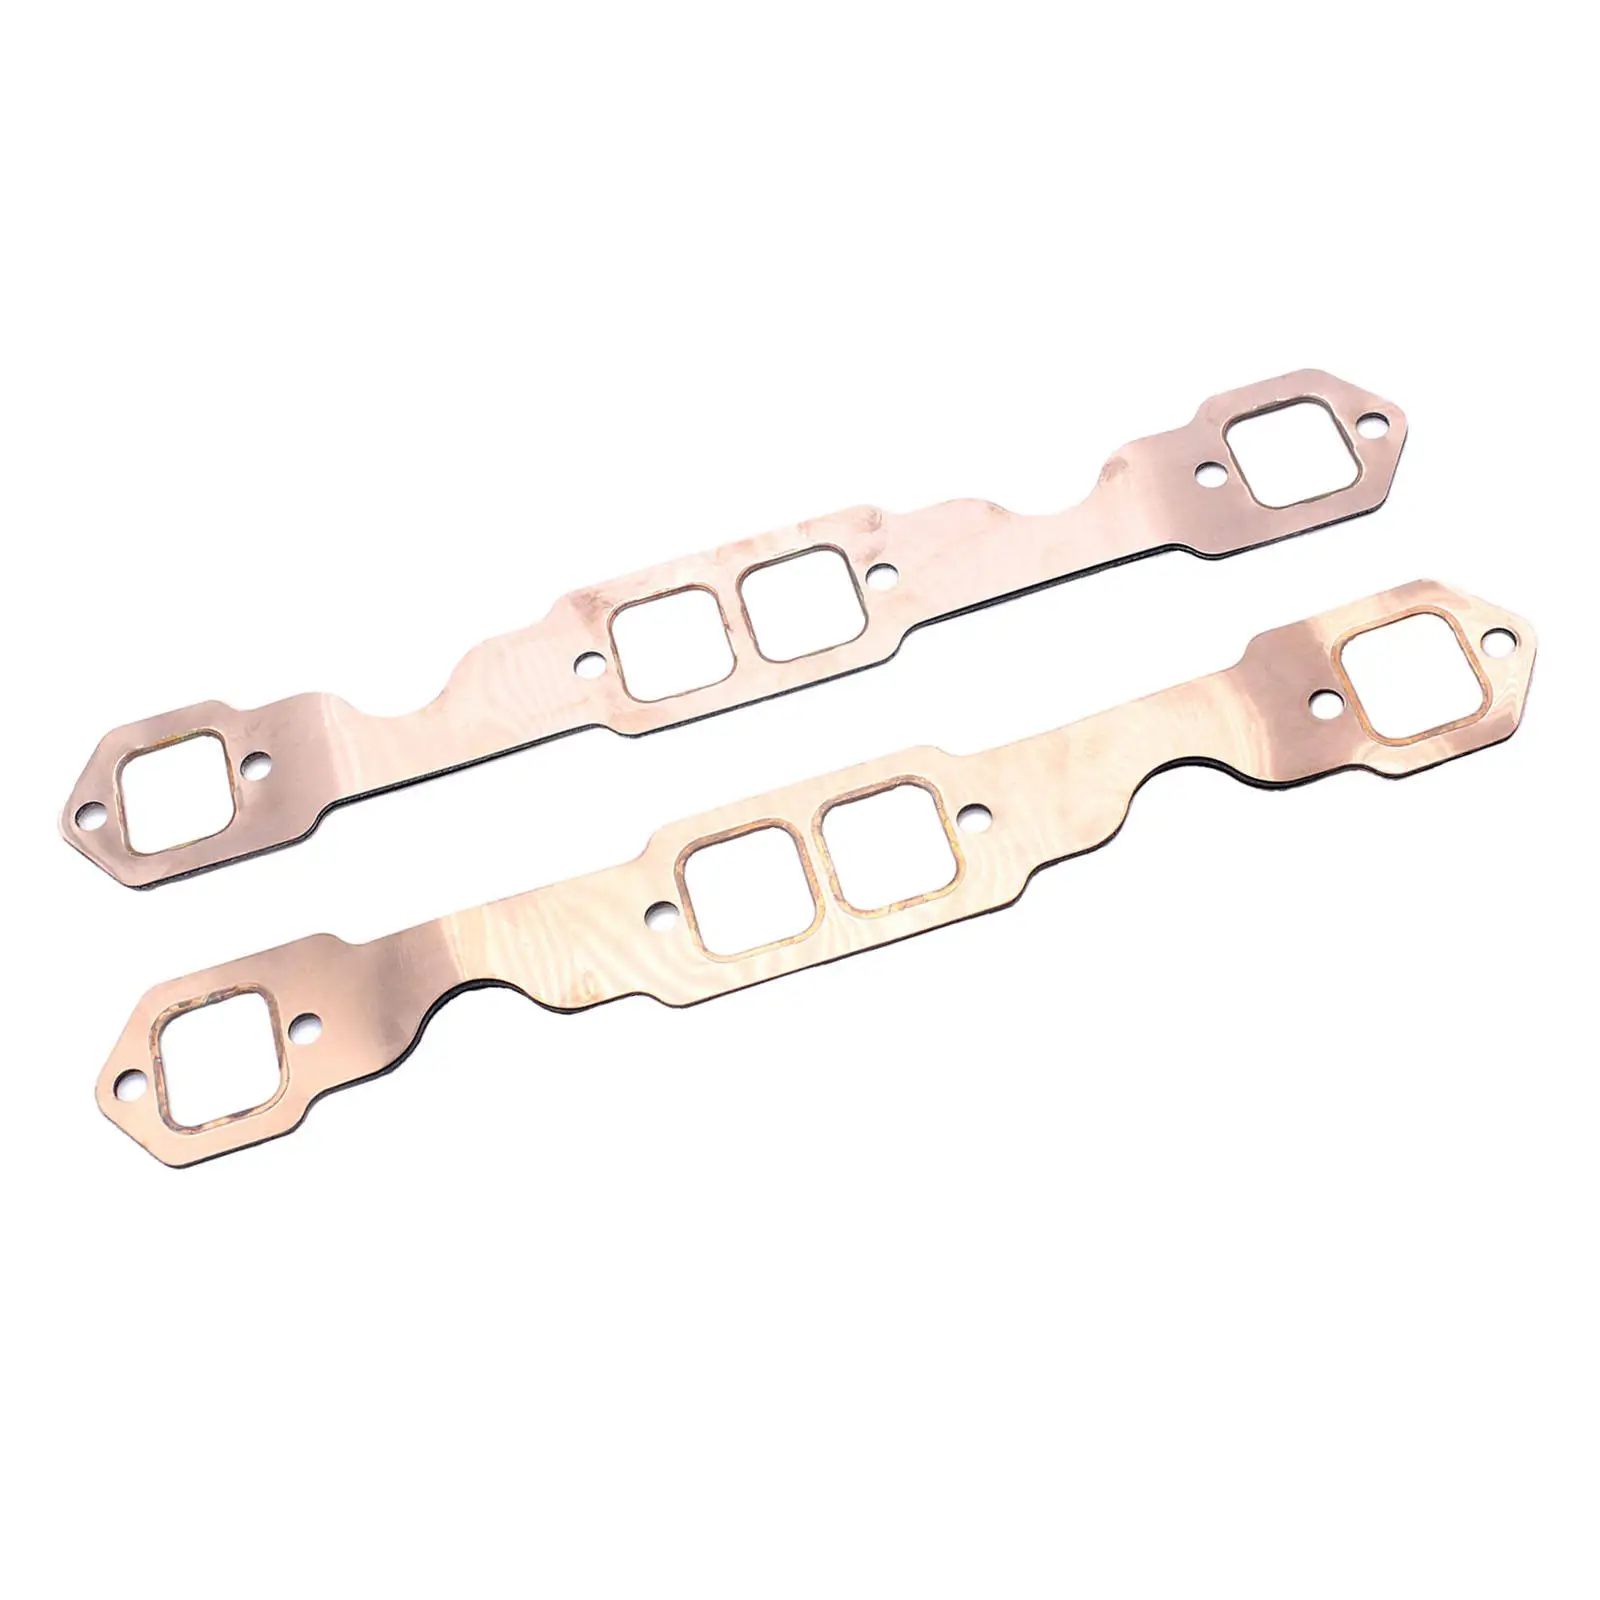 2pcs SBC Copper Header Exhaust Gasket Seal For Chevy SB 327 305 350 383 Exhaust Manifold Gasket Set